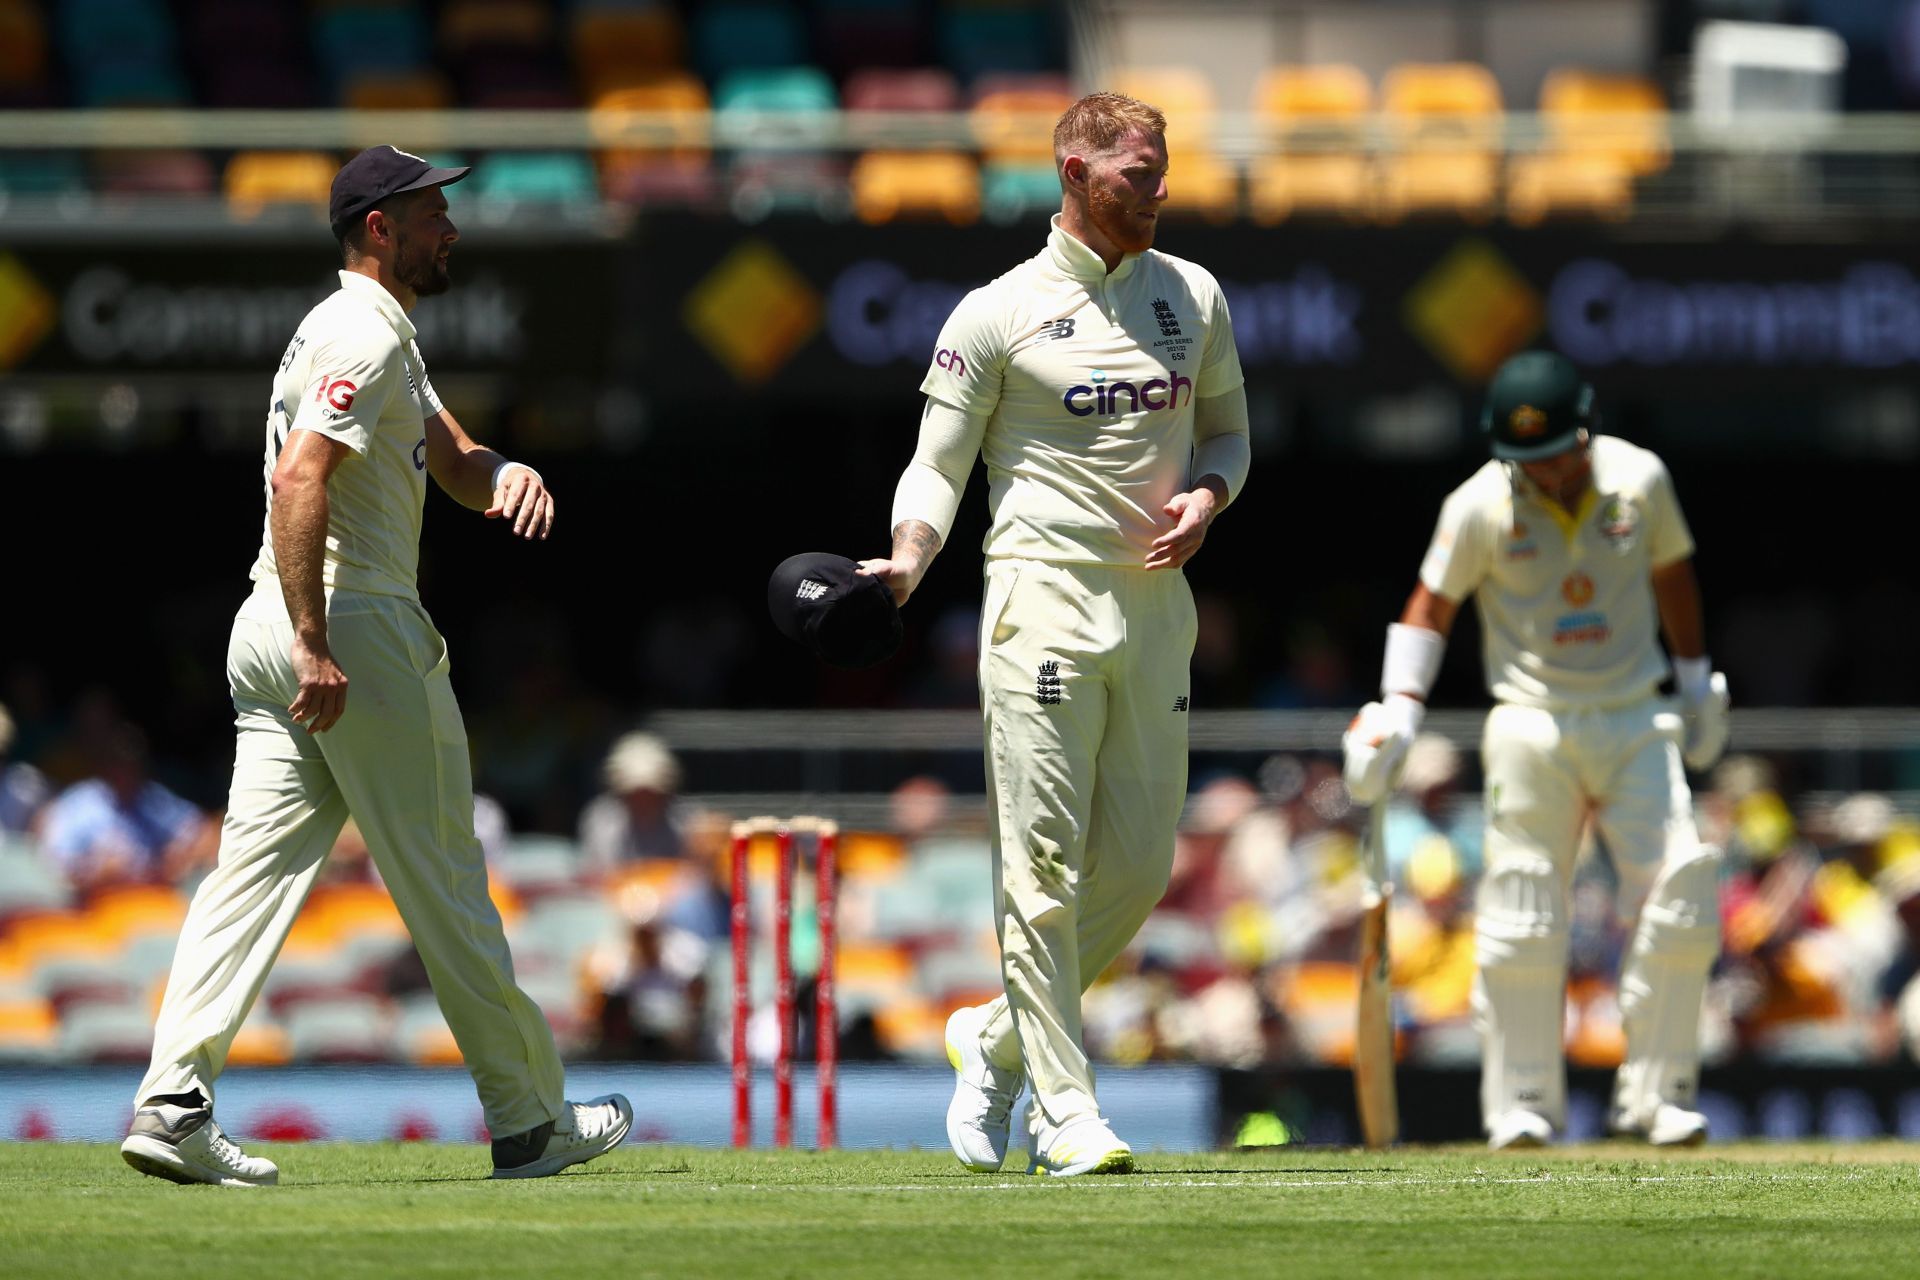 Ben Stokes was seen struggling with his hamstring on day 2 of the first Ashes Test (Credit: Getty Images)